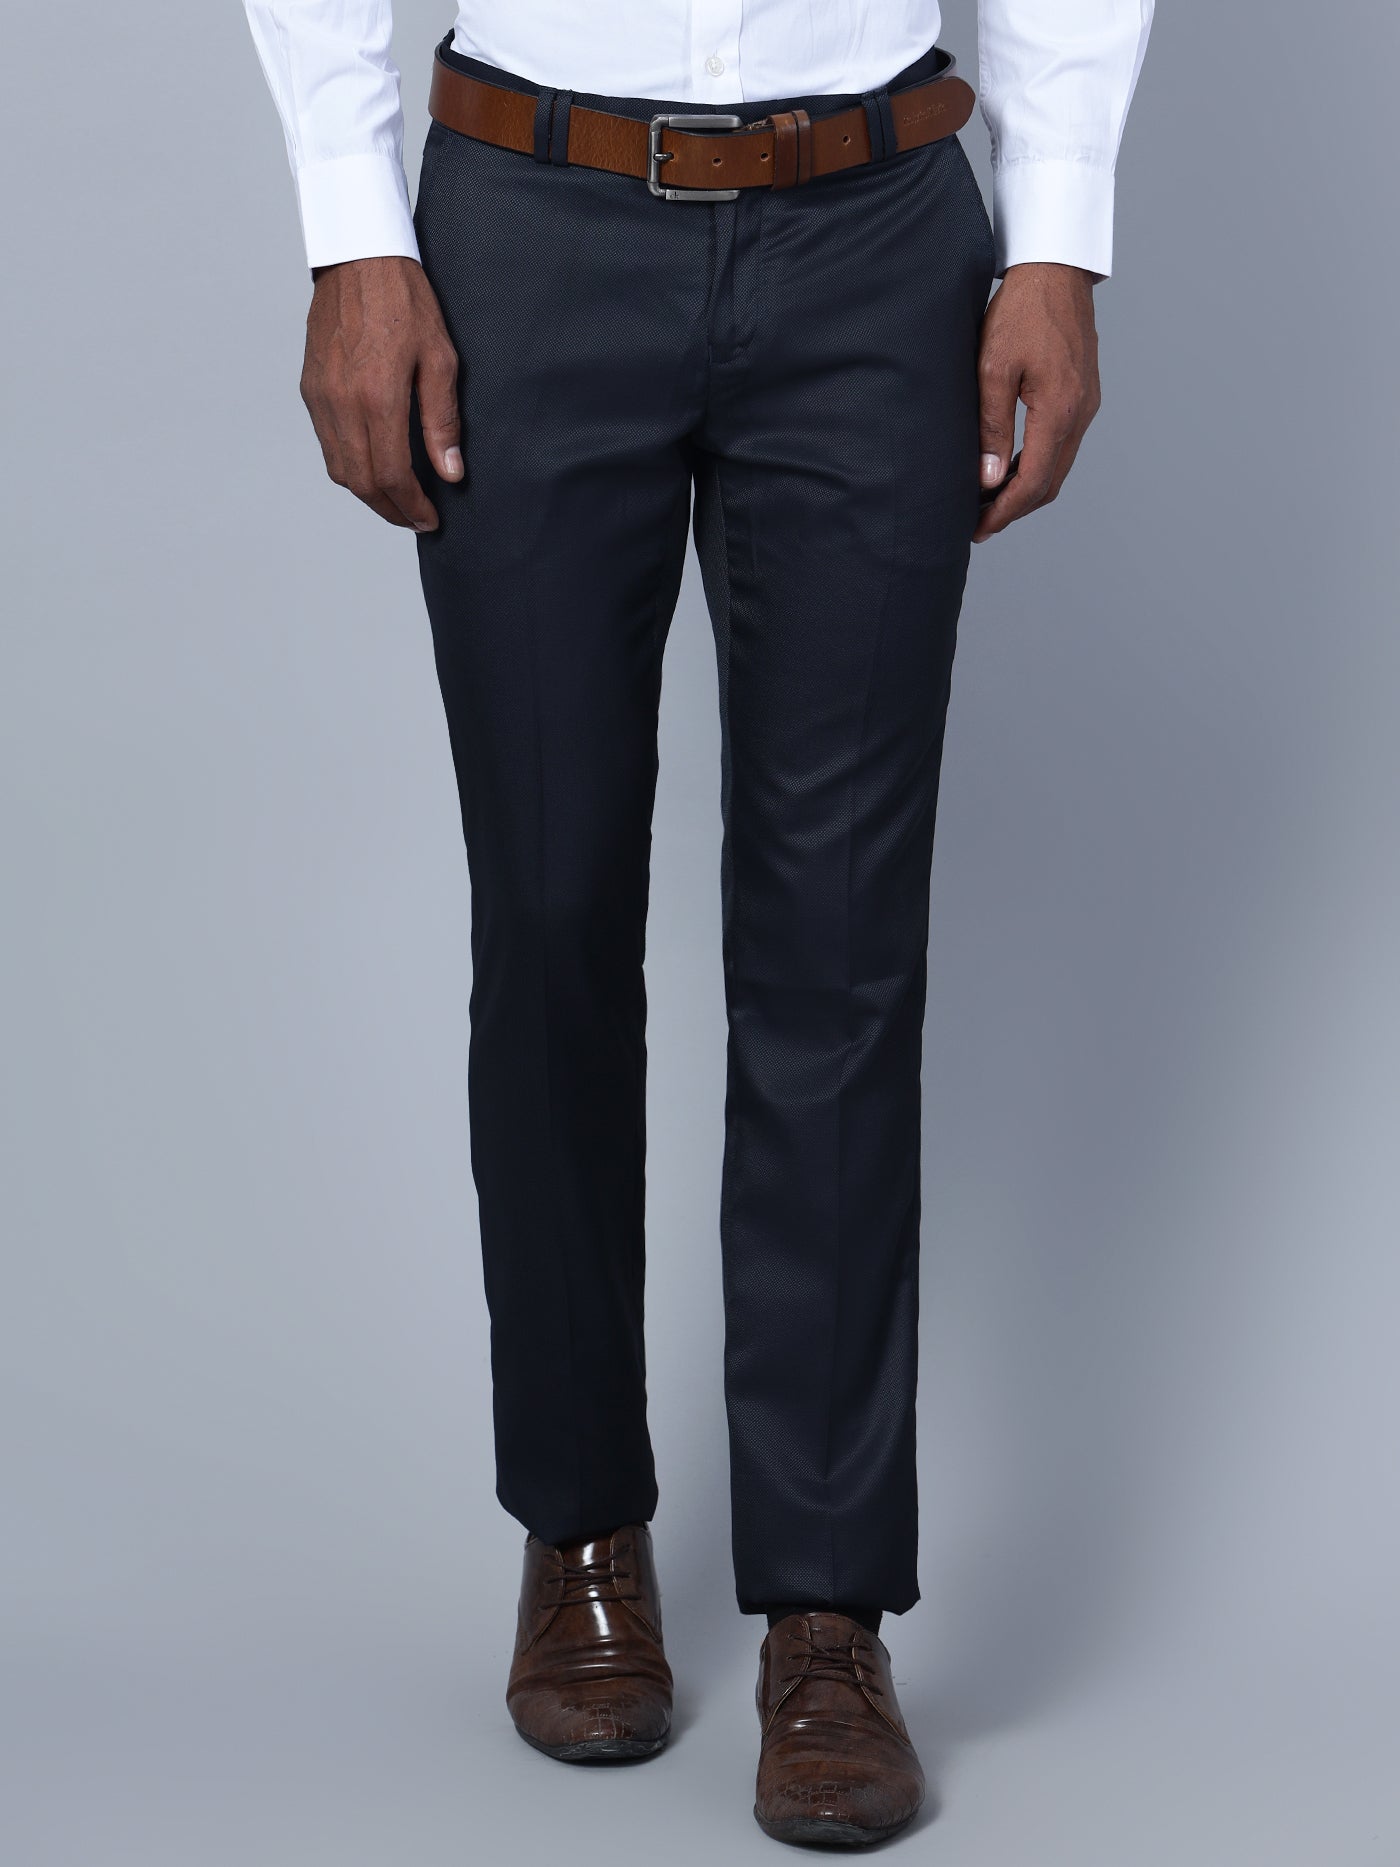 Cantabil Track Trousers - Buy Cantabil Track Trousers online in India